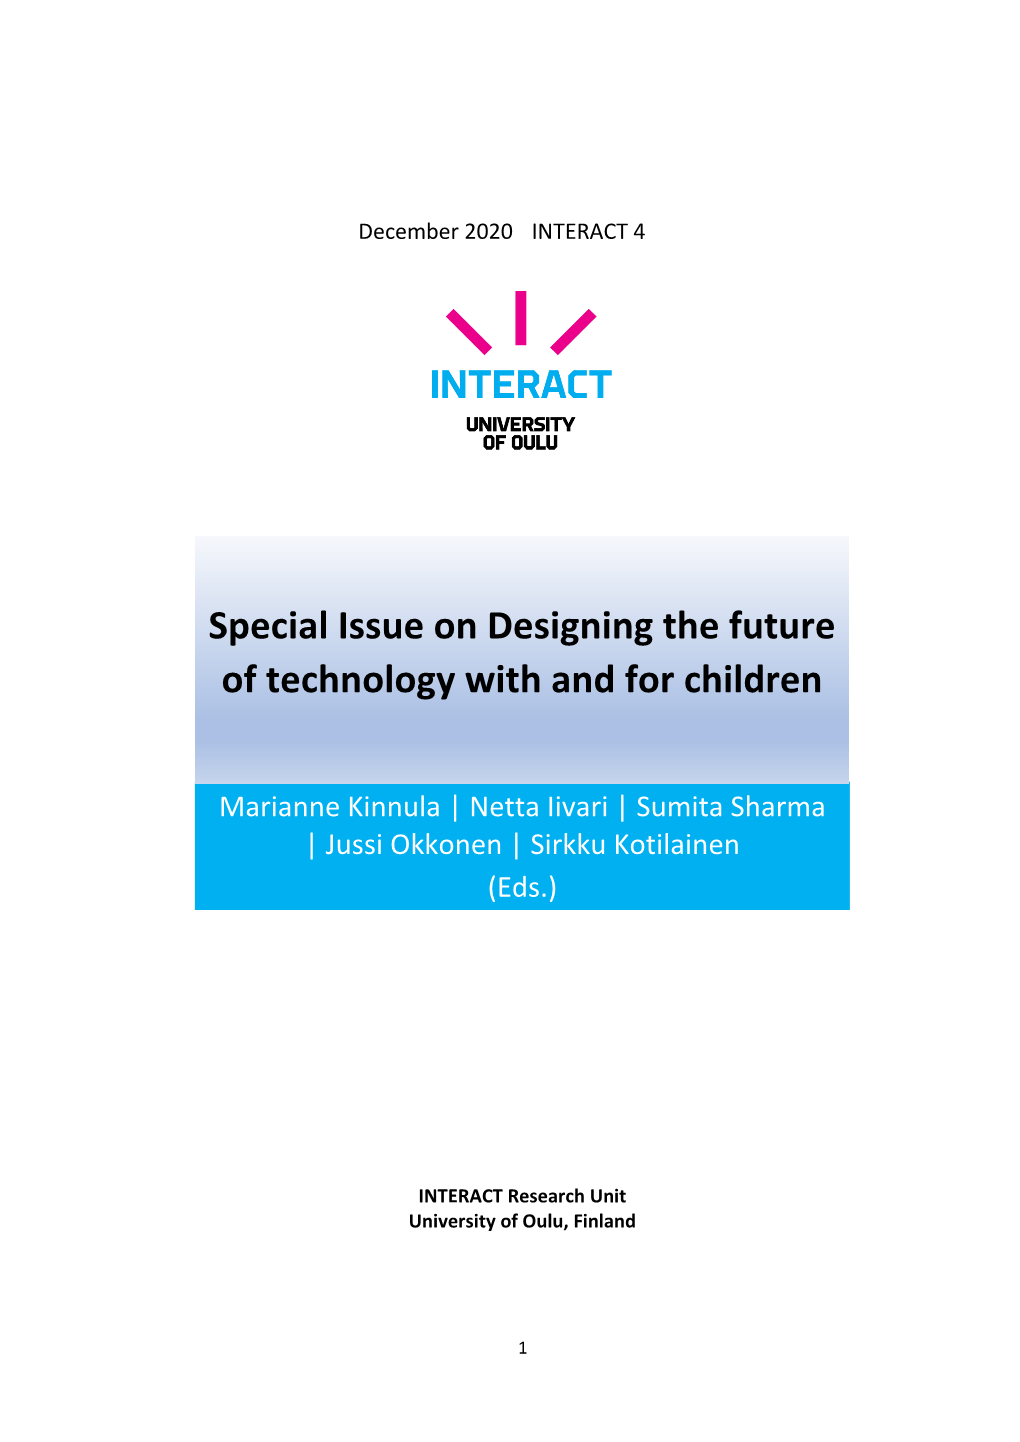 Special Issue on Designing the Future of Technology with and for Children